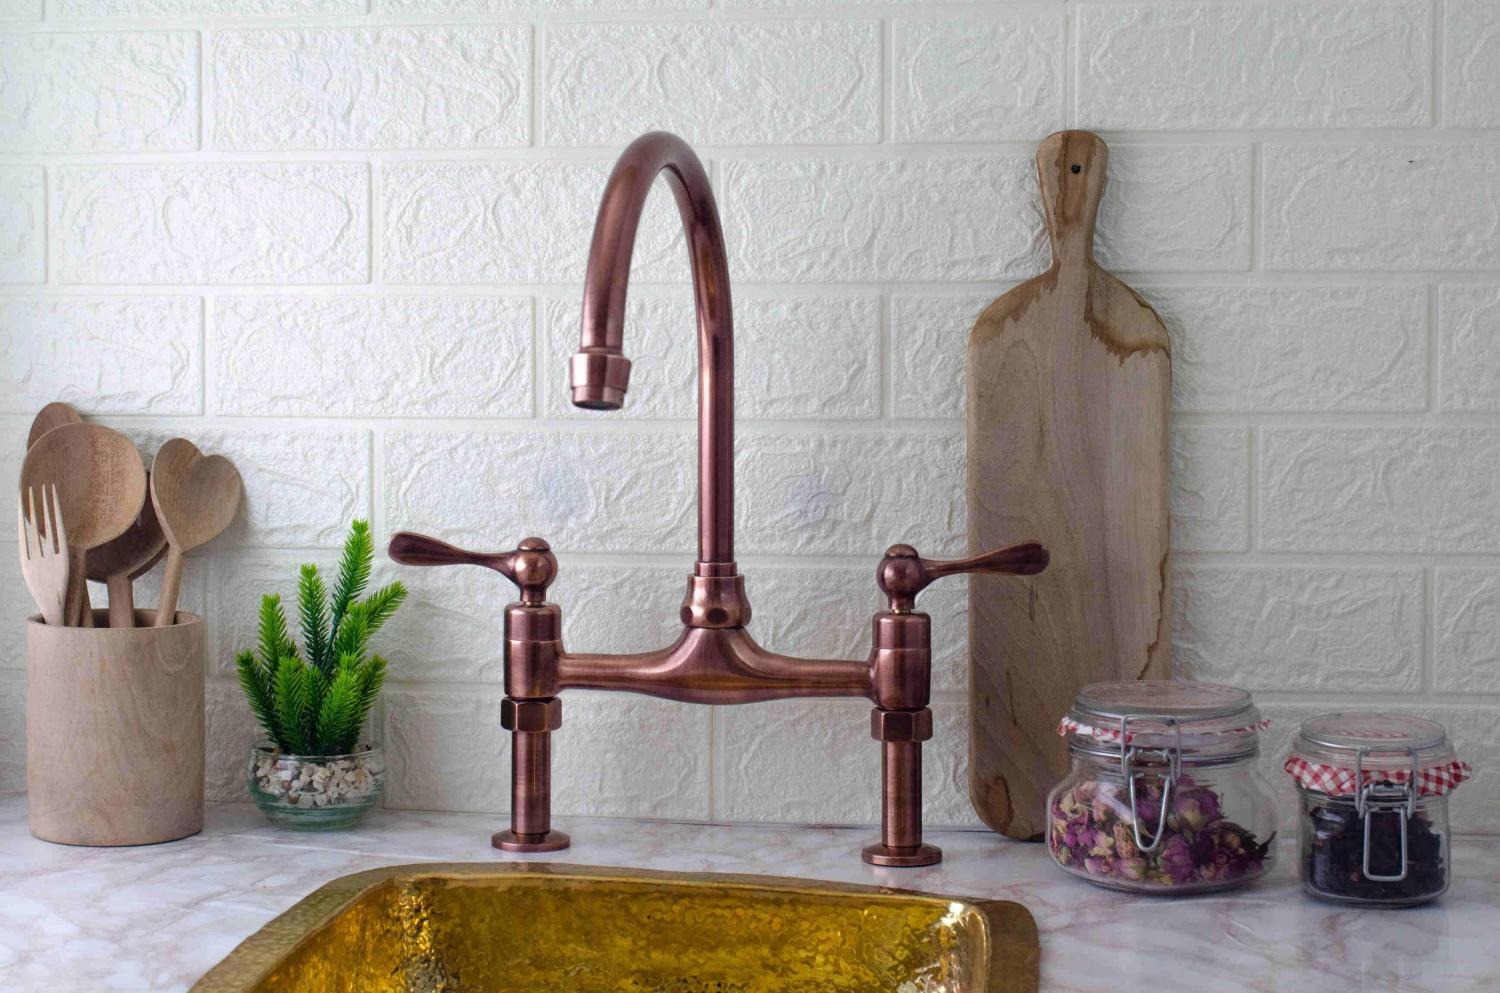 A Comprehensive Guide to the Best Bridge Kitchen Faucets - Blog - 2